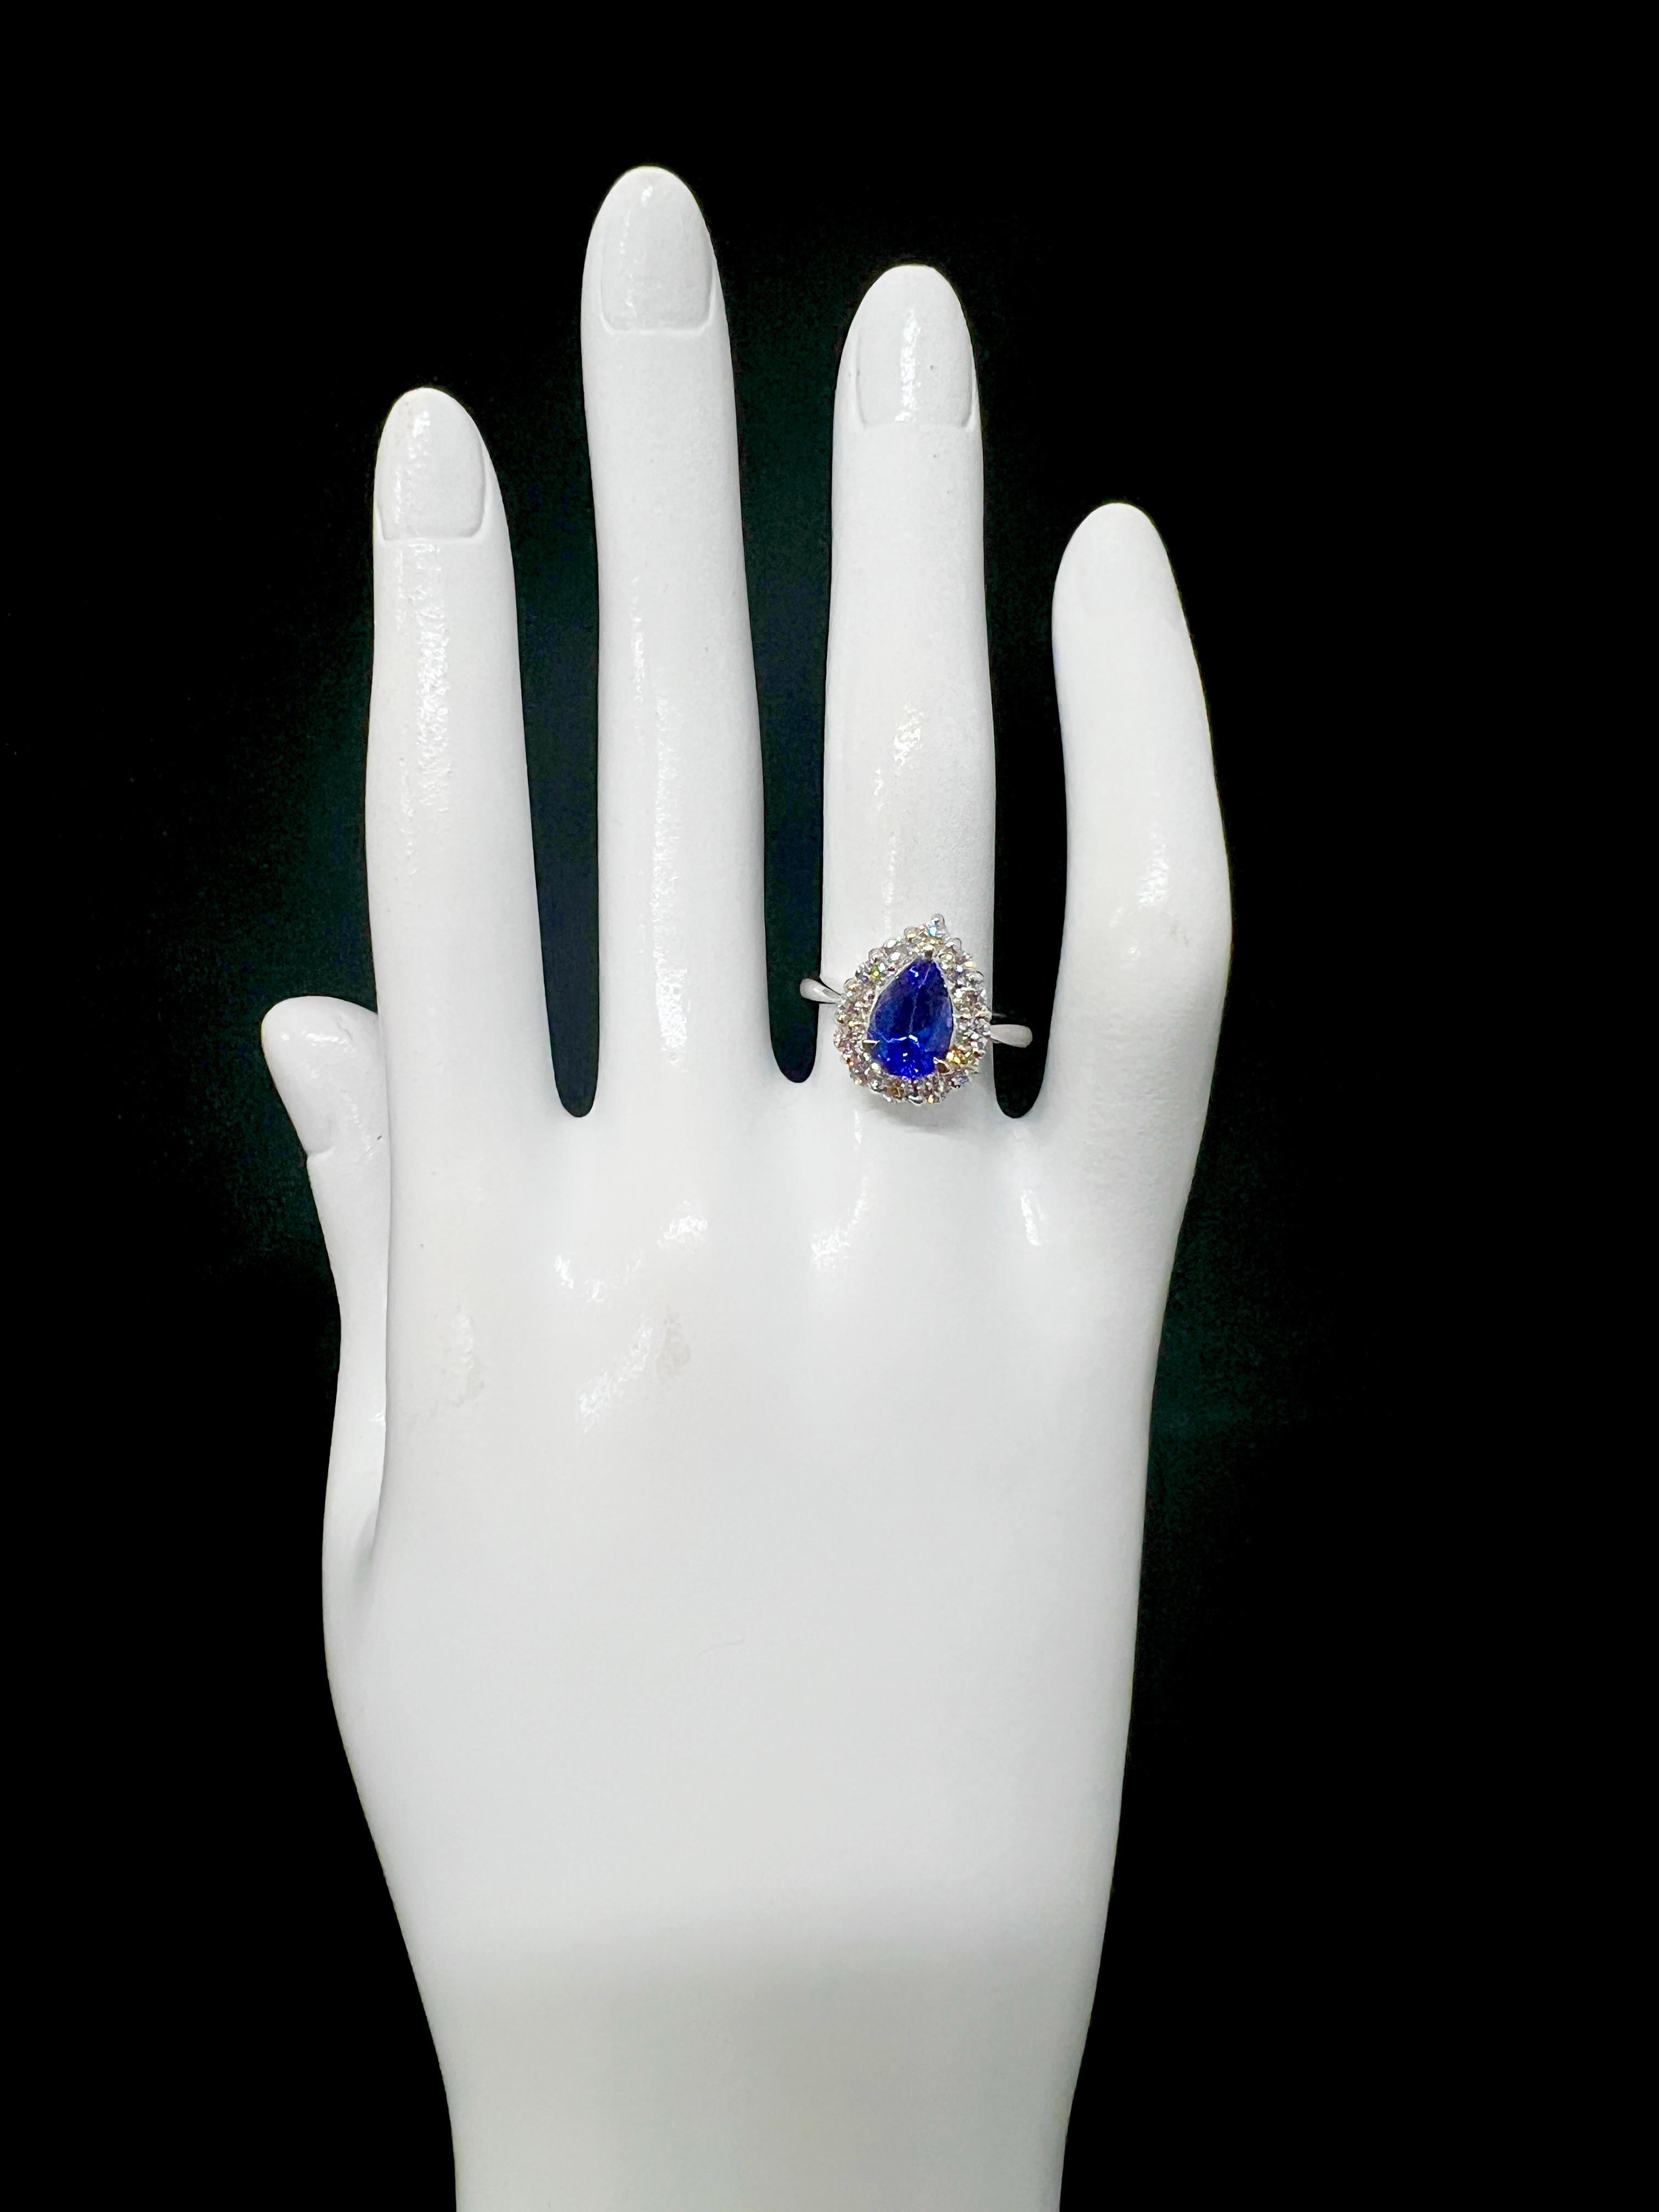 1.69 Carat Natural Pear Cut AAA+ Tanzanite and Diamond Ring Set in Platinum For Sale 2